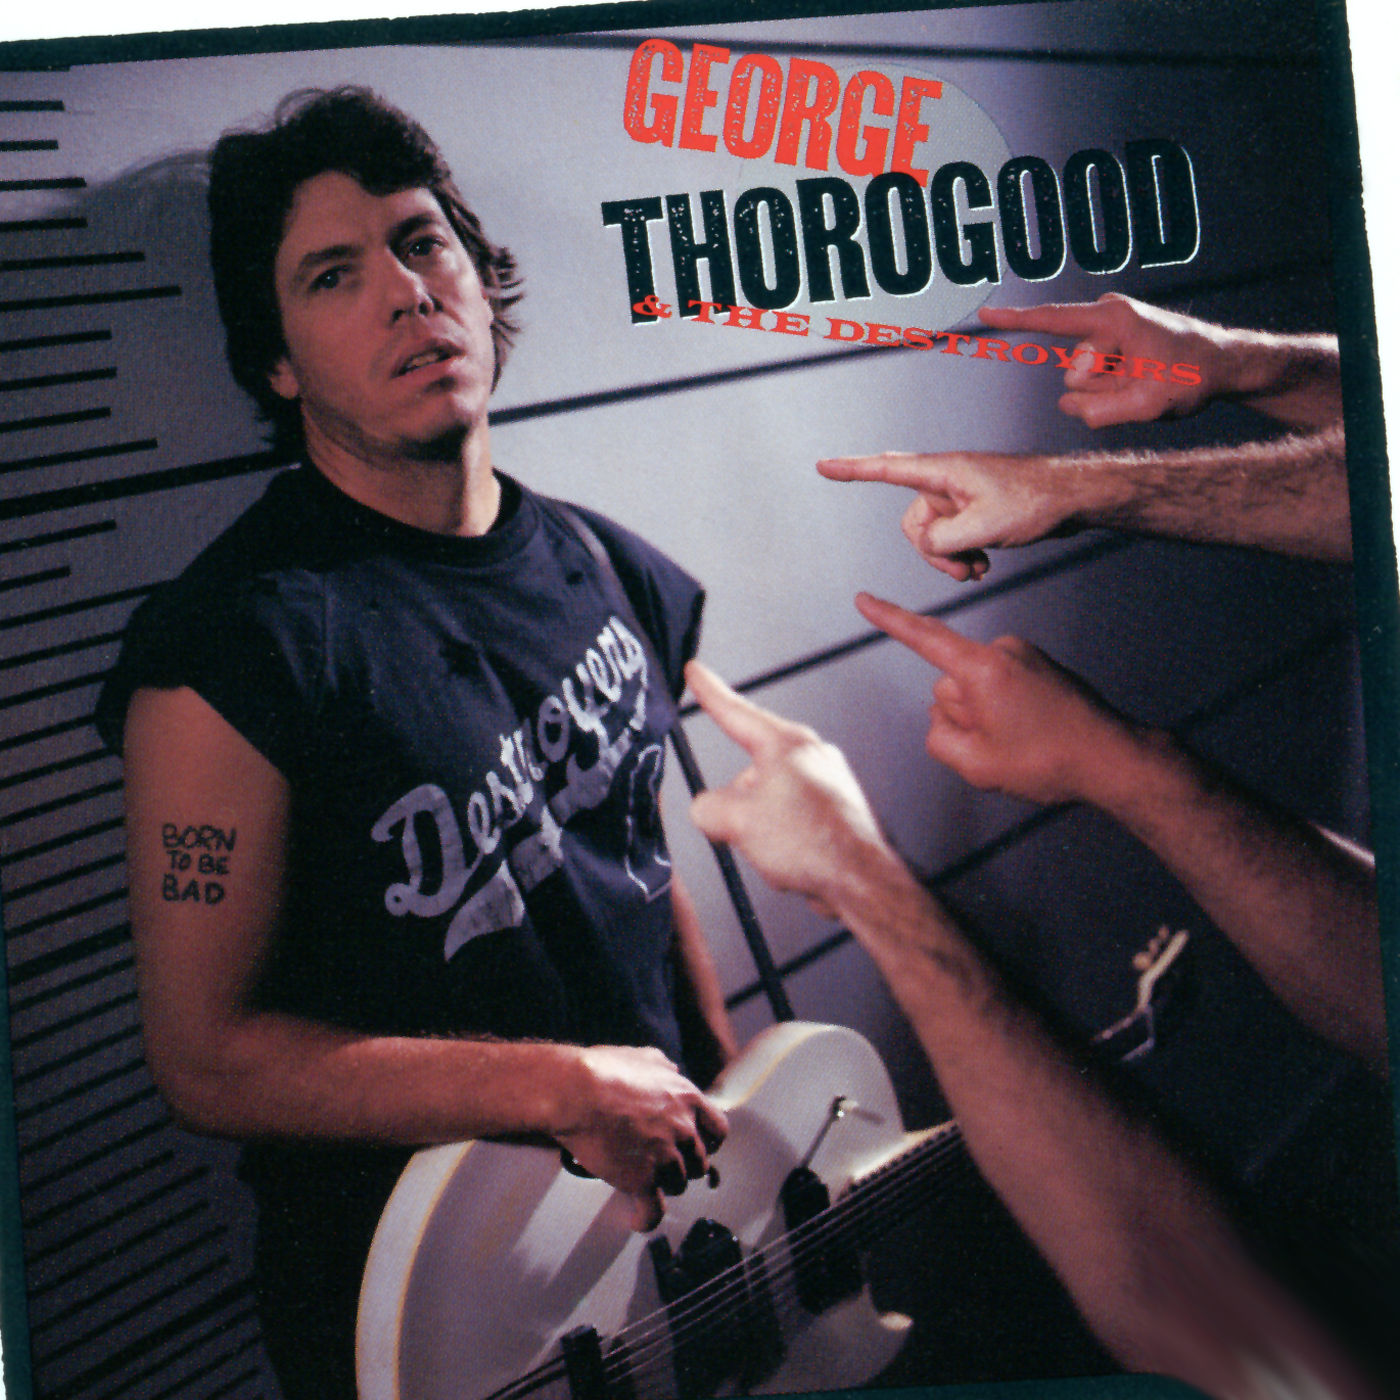 George Thorogood & The Destroyers - Born To Be Bad (1988/2021) [FLAC 24bit/192kHz]